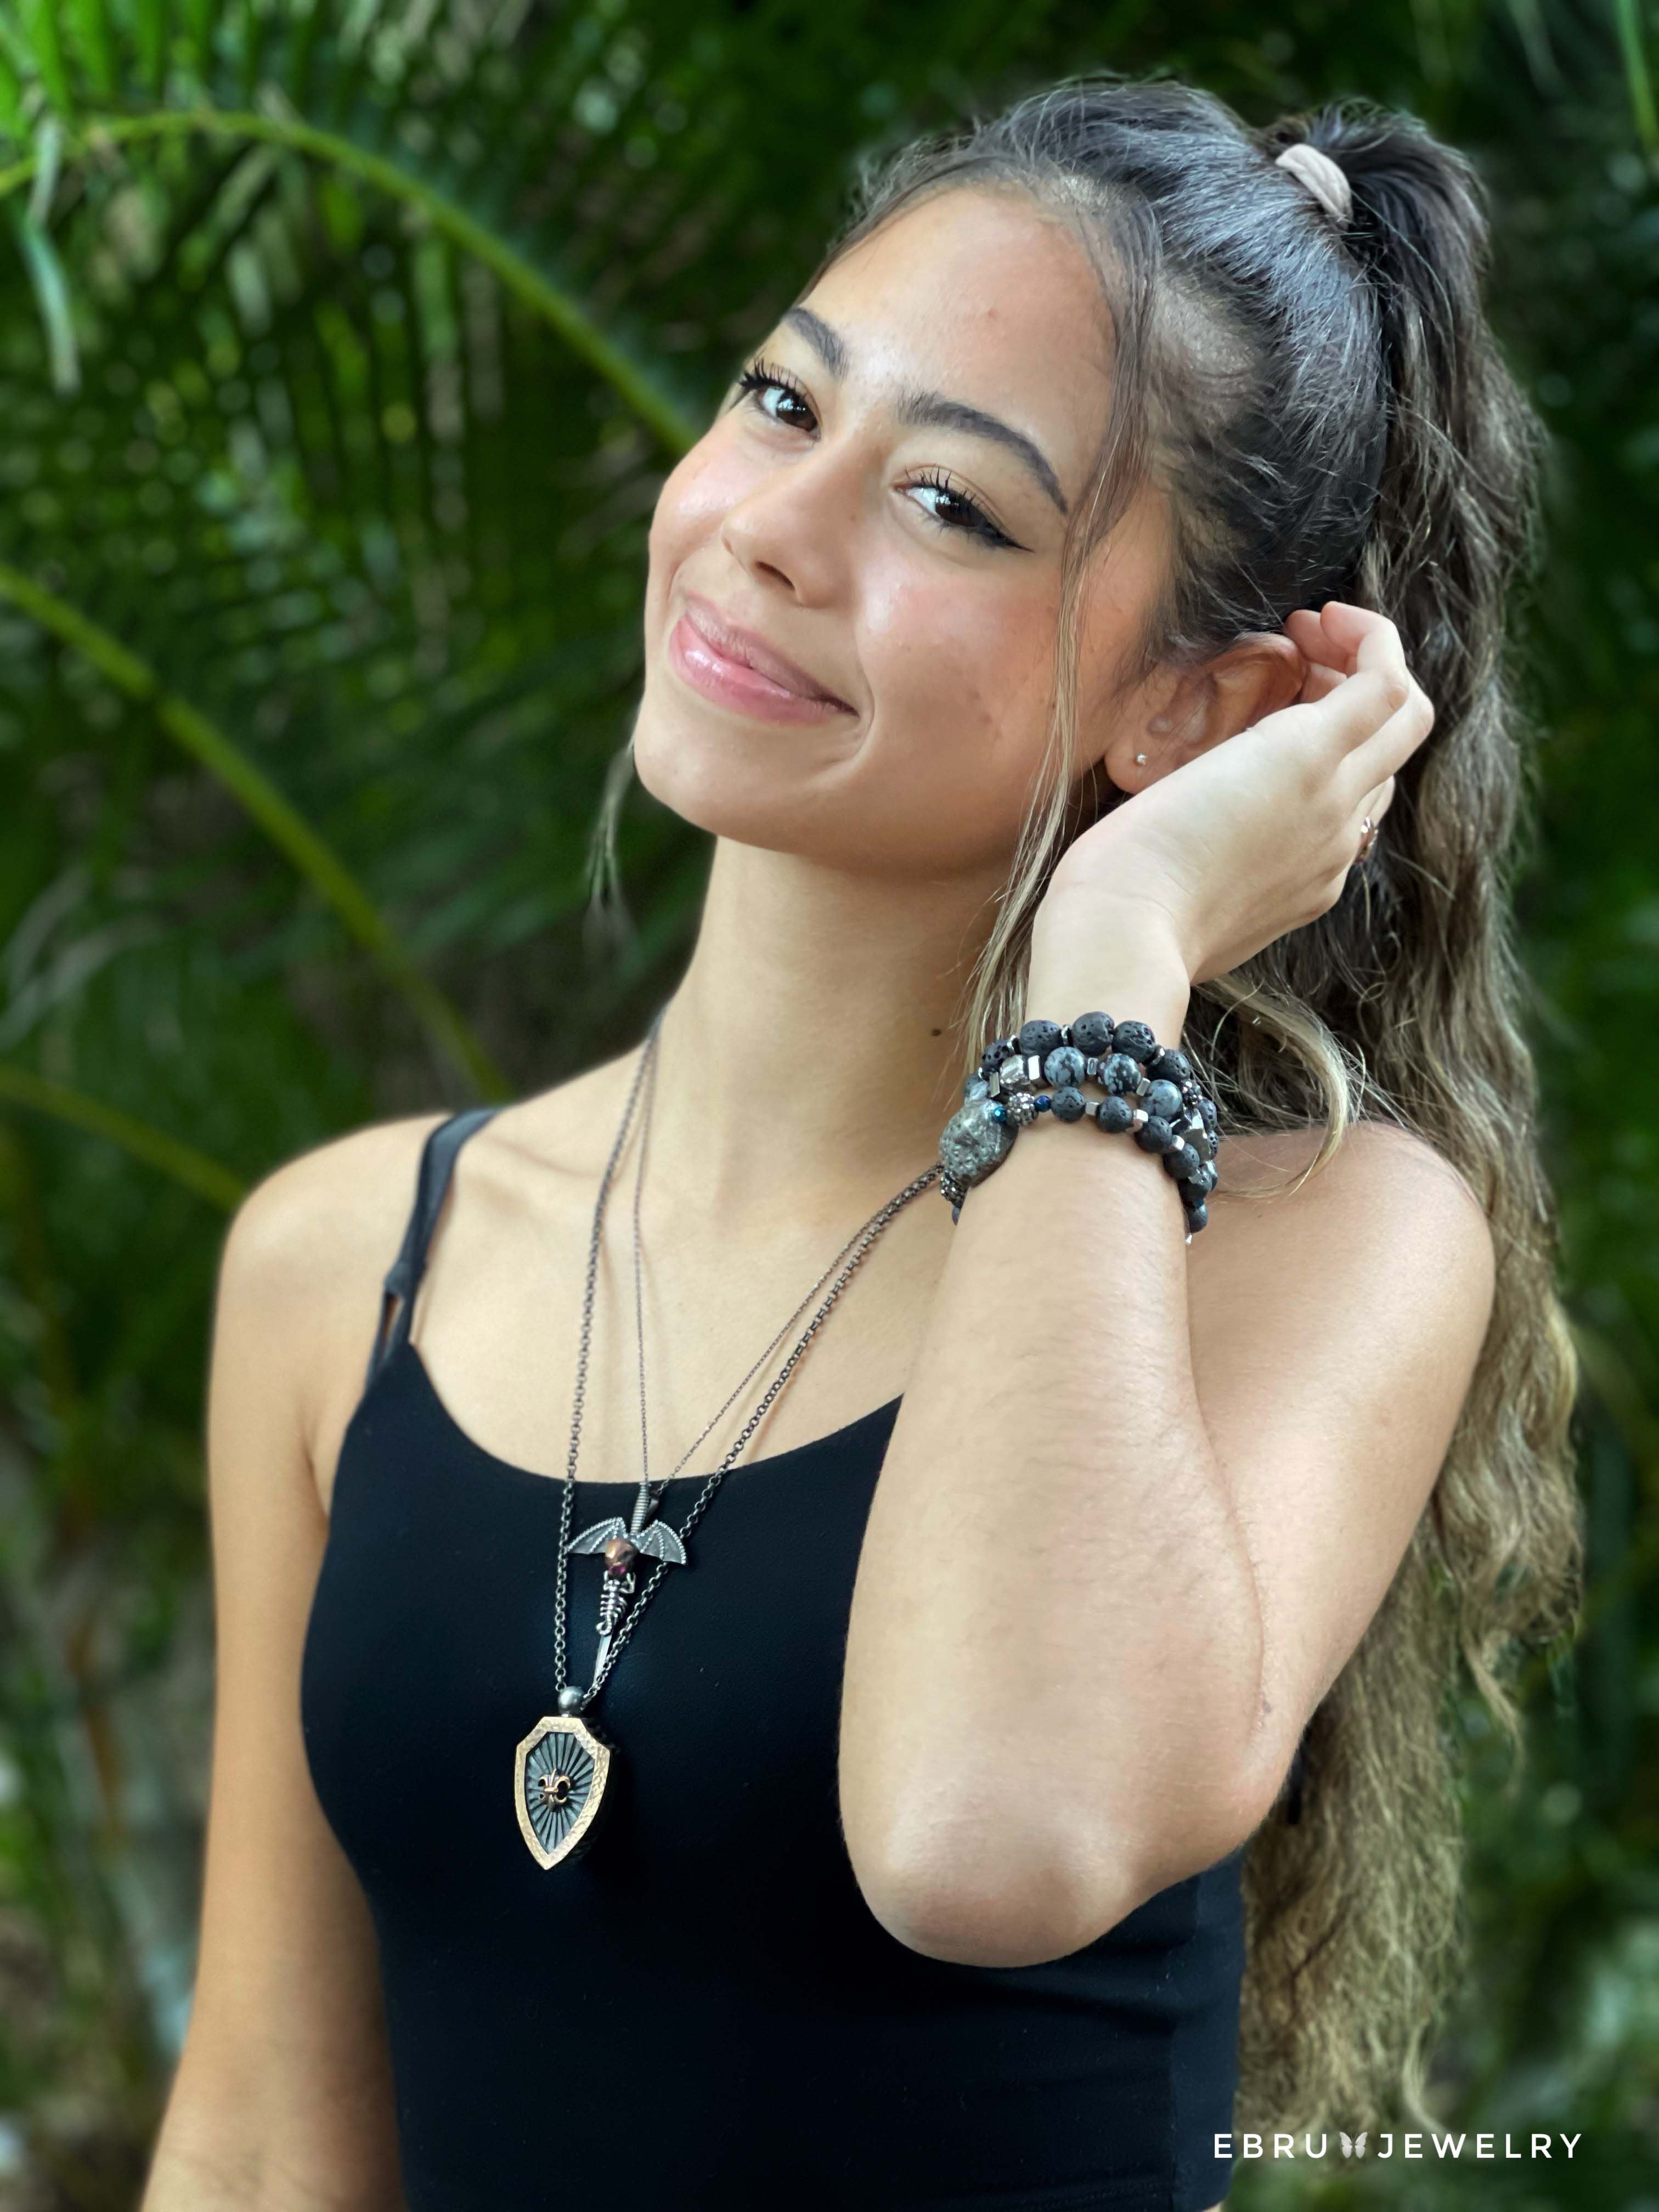 Elegant Model wearing Fleur de Lis Necklace - Meticulously crafted accessory with a sterling silver chain and beautifully designed pendant, radiating grace and purpose.